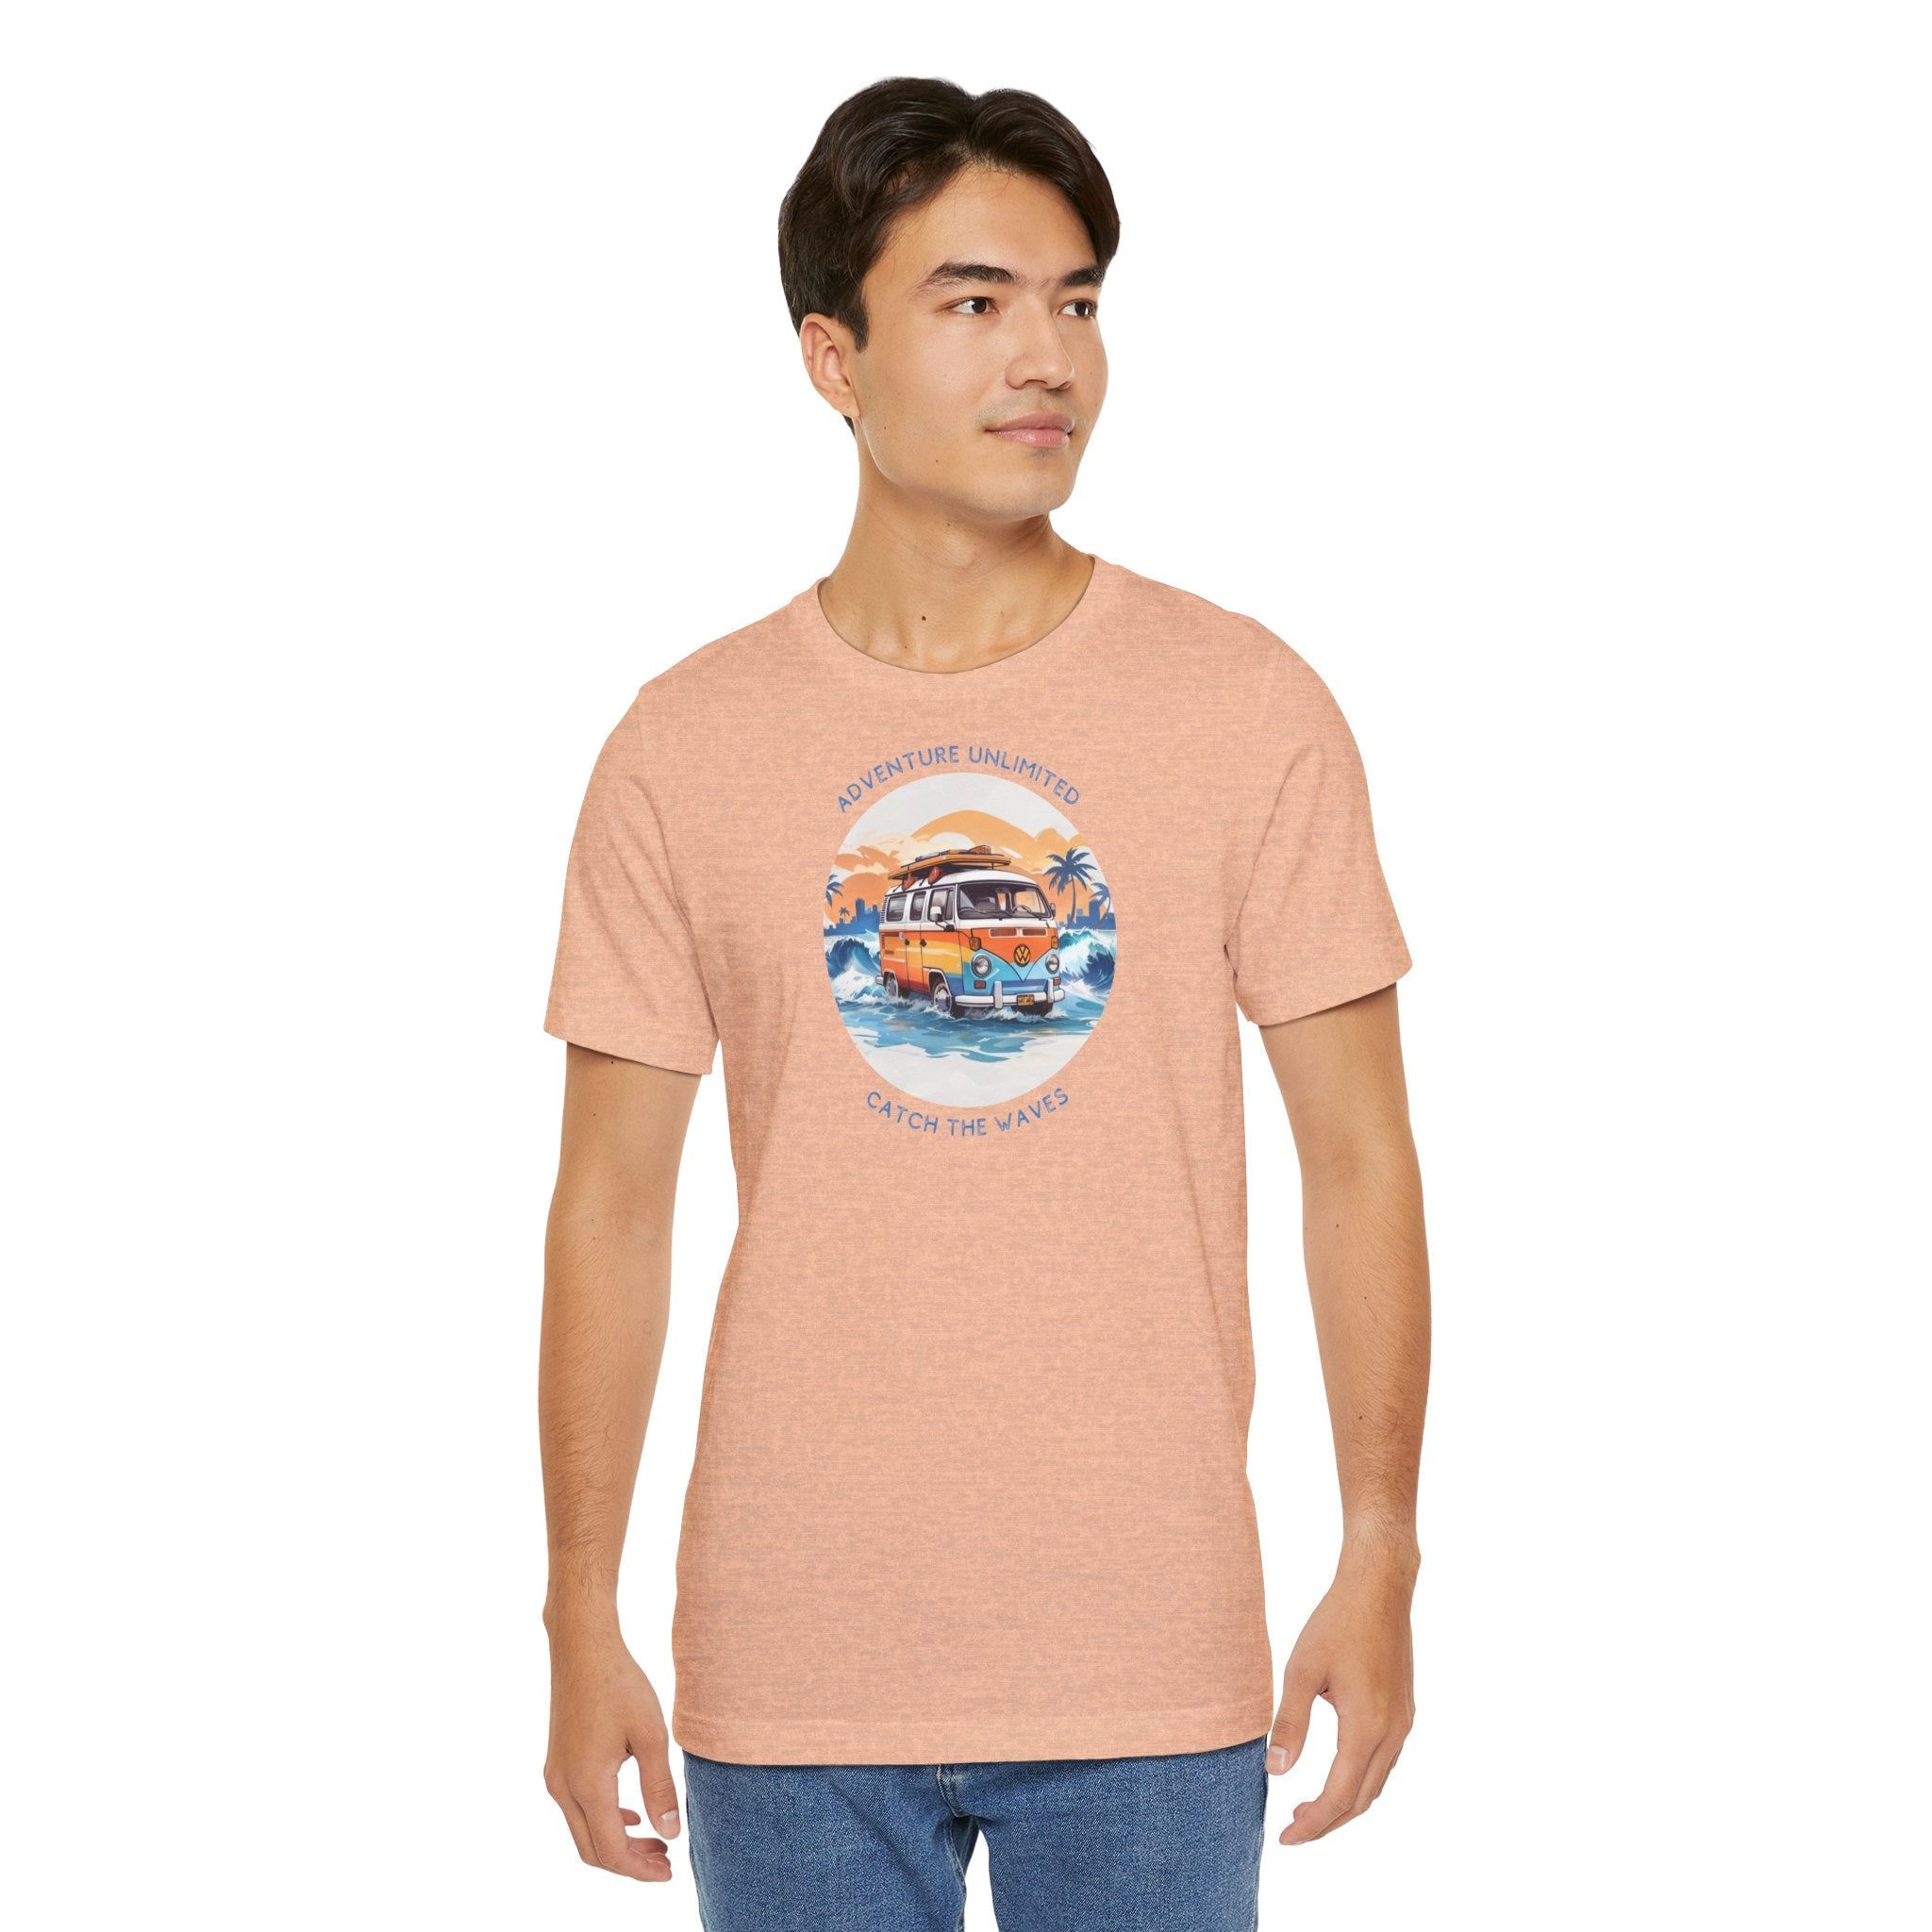 Printed men’s pink shirt with boat design on Adventure Unlimited t-shirt by Soulshinecreators